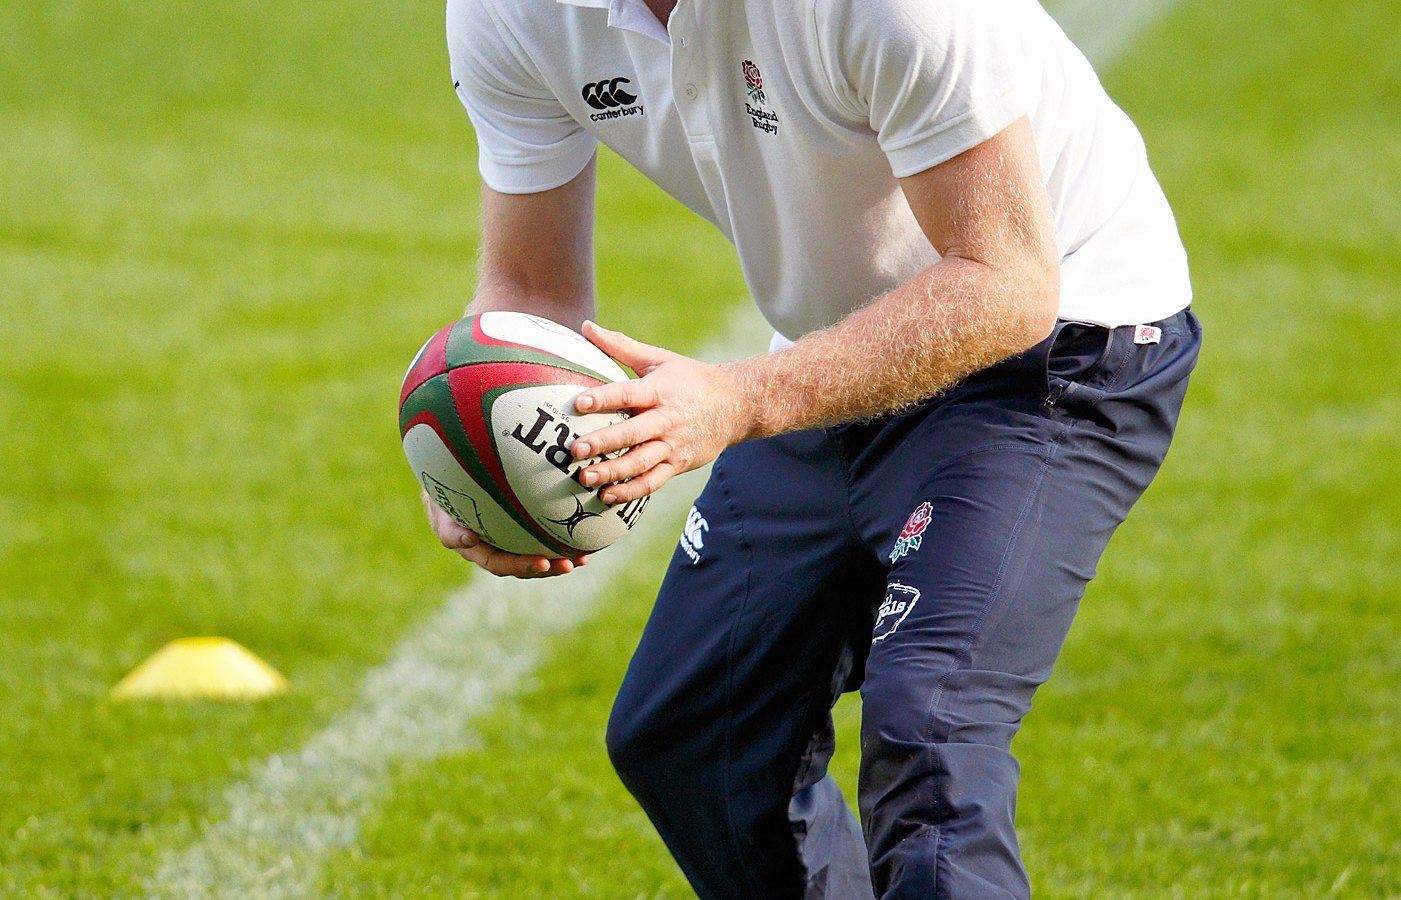 Prince Harry playing rugby on October 17, 2013 in London